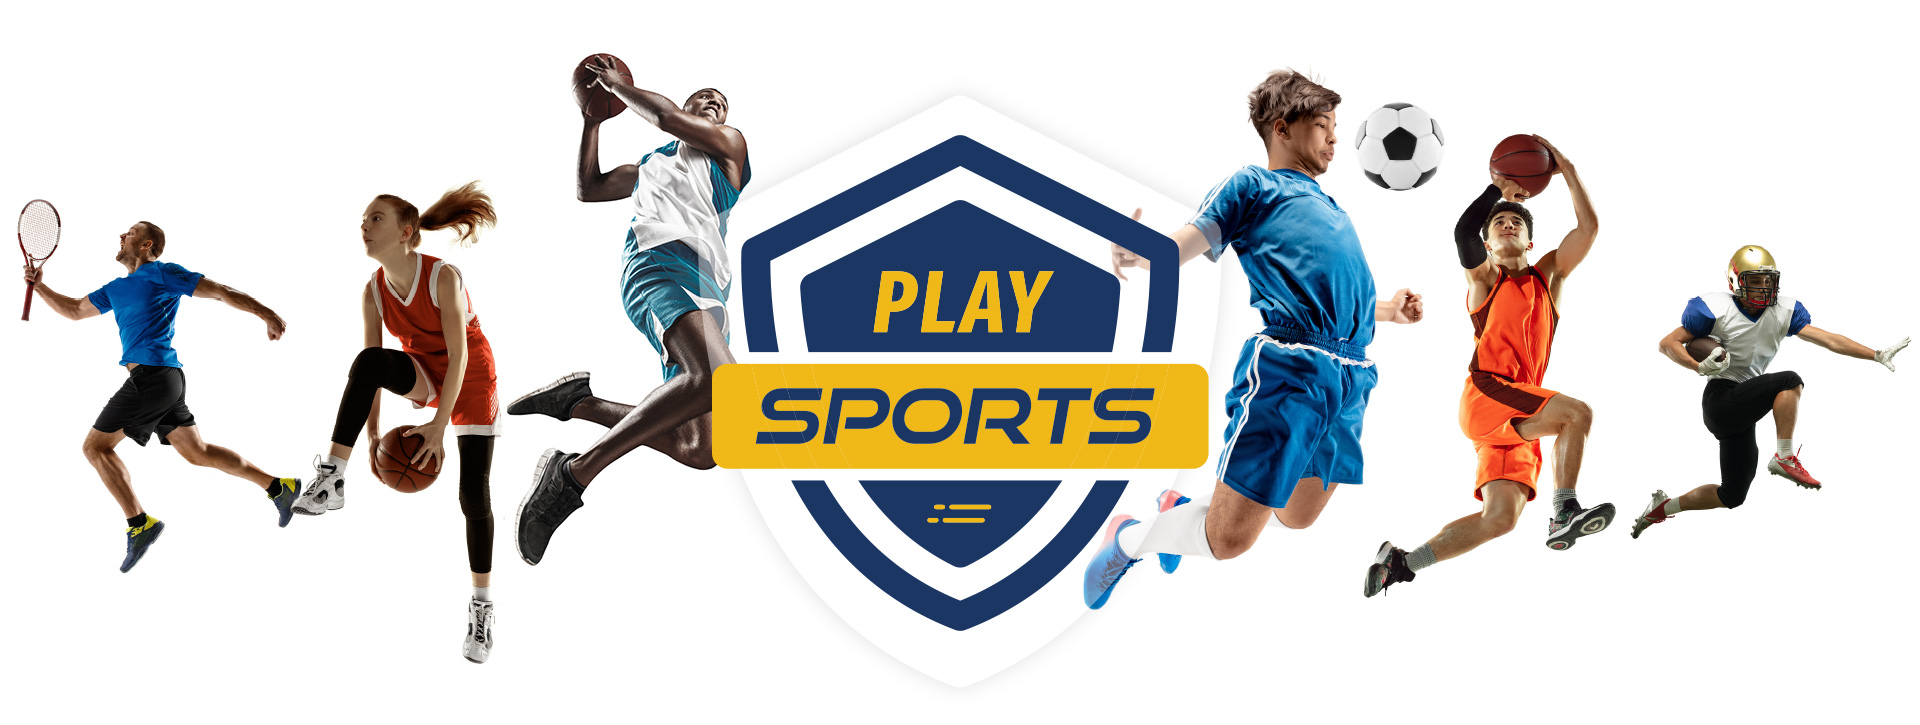 PlaySports-College Application forms